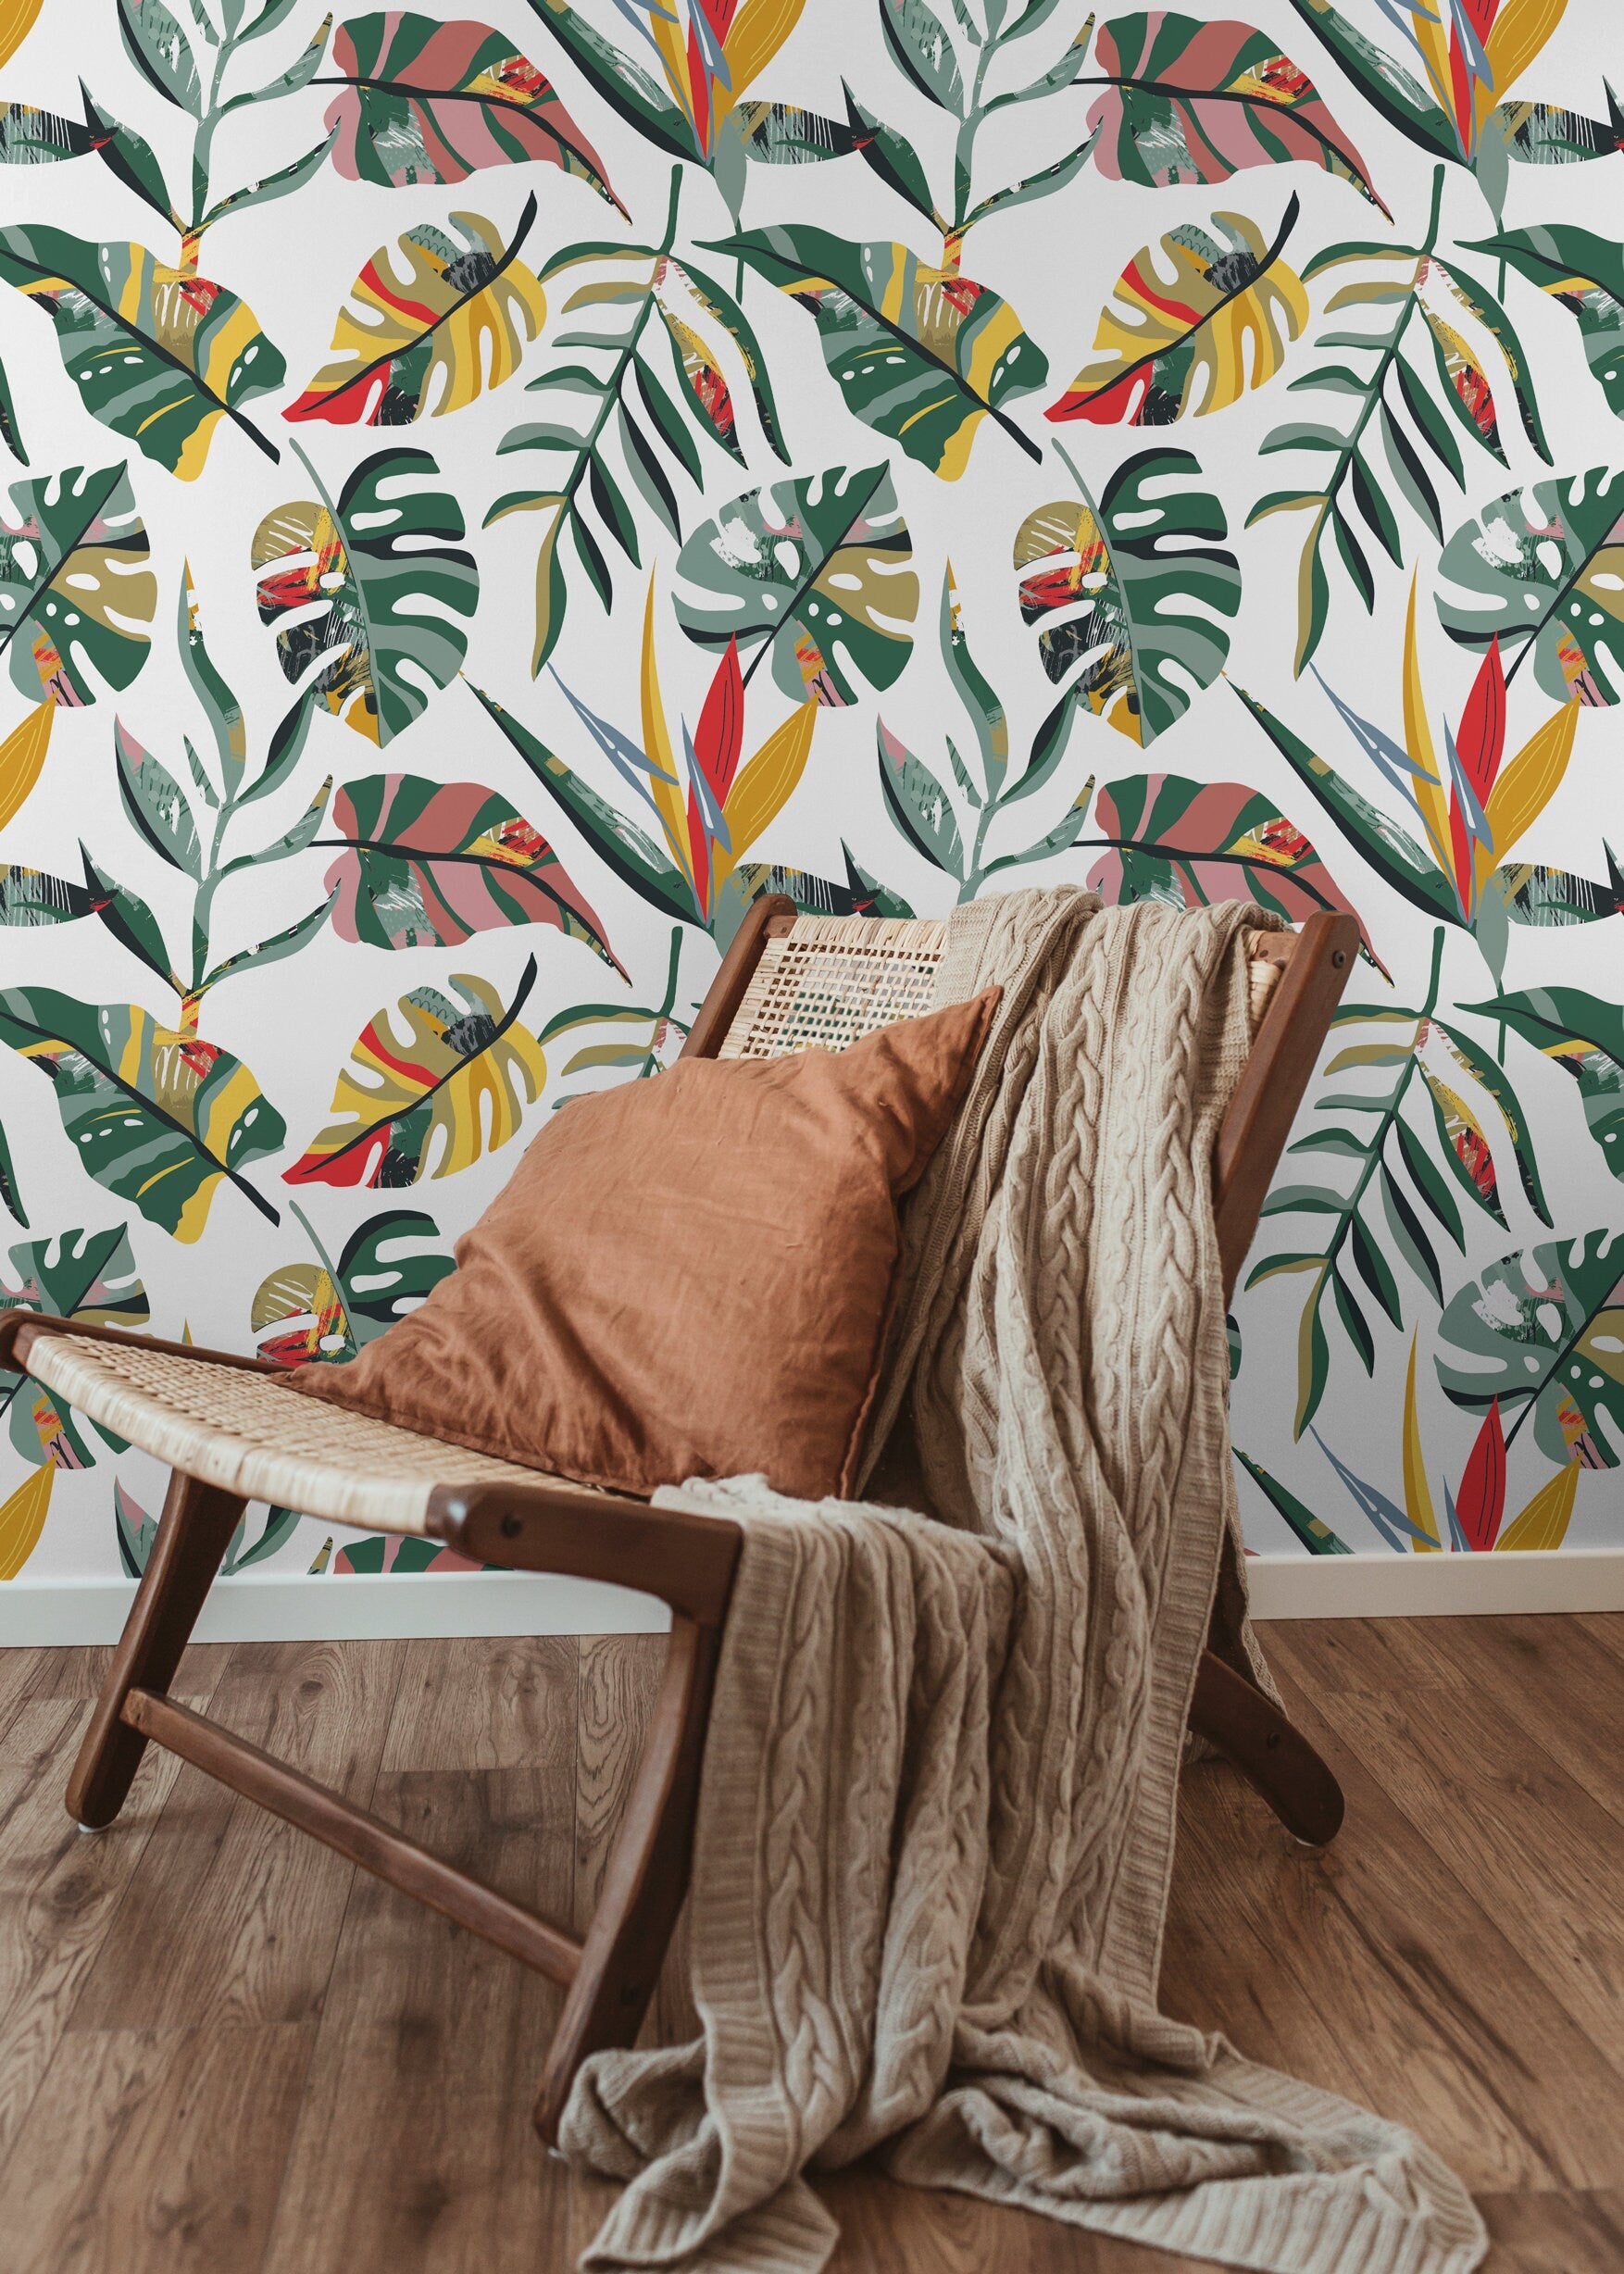 Wallpaper Peel and Stick Wallpaper Removable Wallpaper Home Decor Wall Art Wall Decor Room Decor / Tropical Leaves Monstera Wallpaper - C136